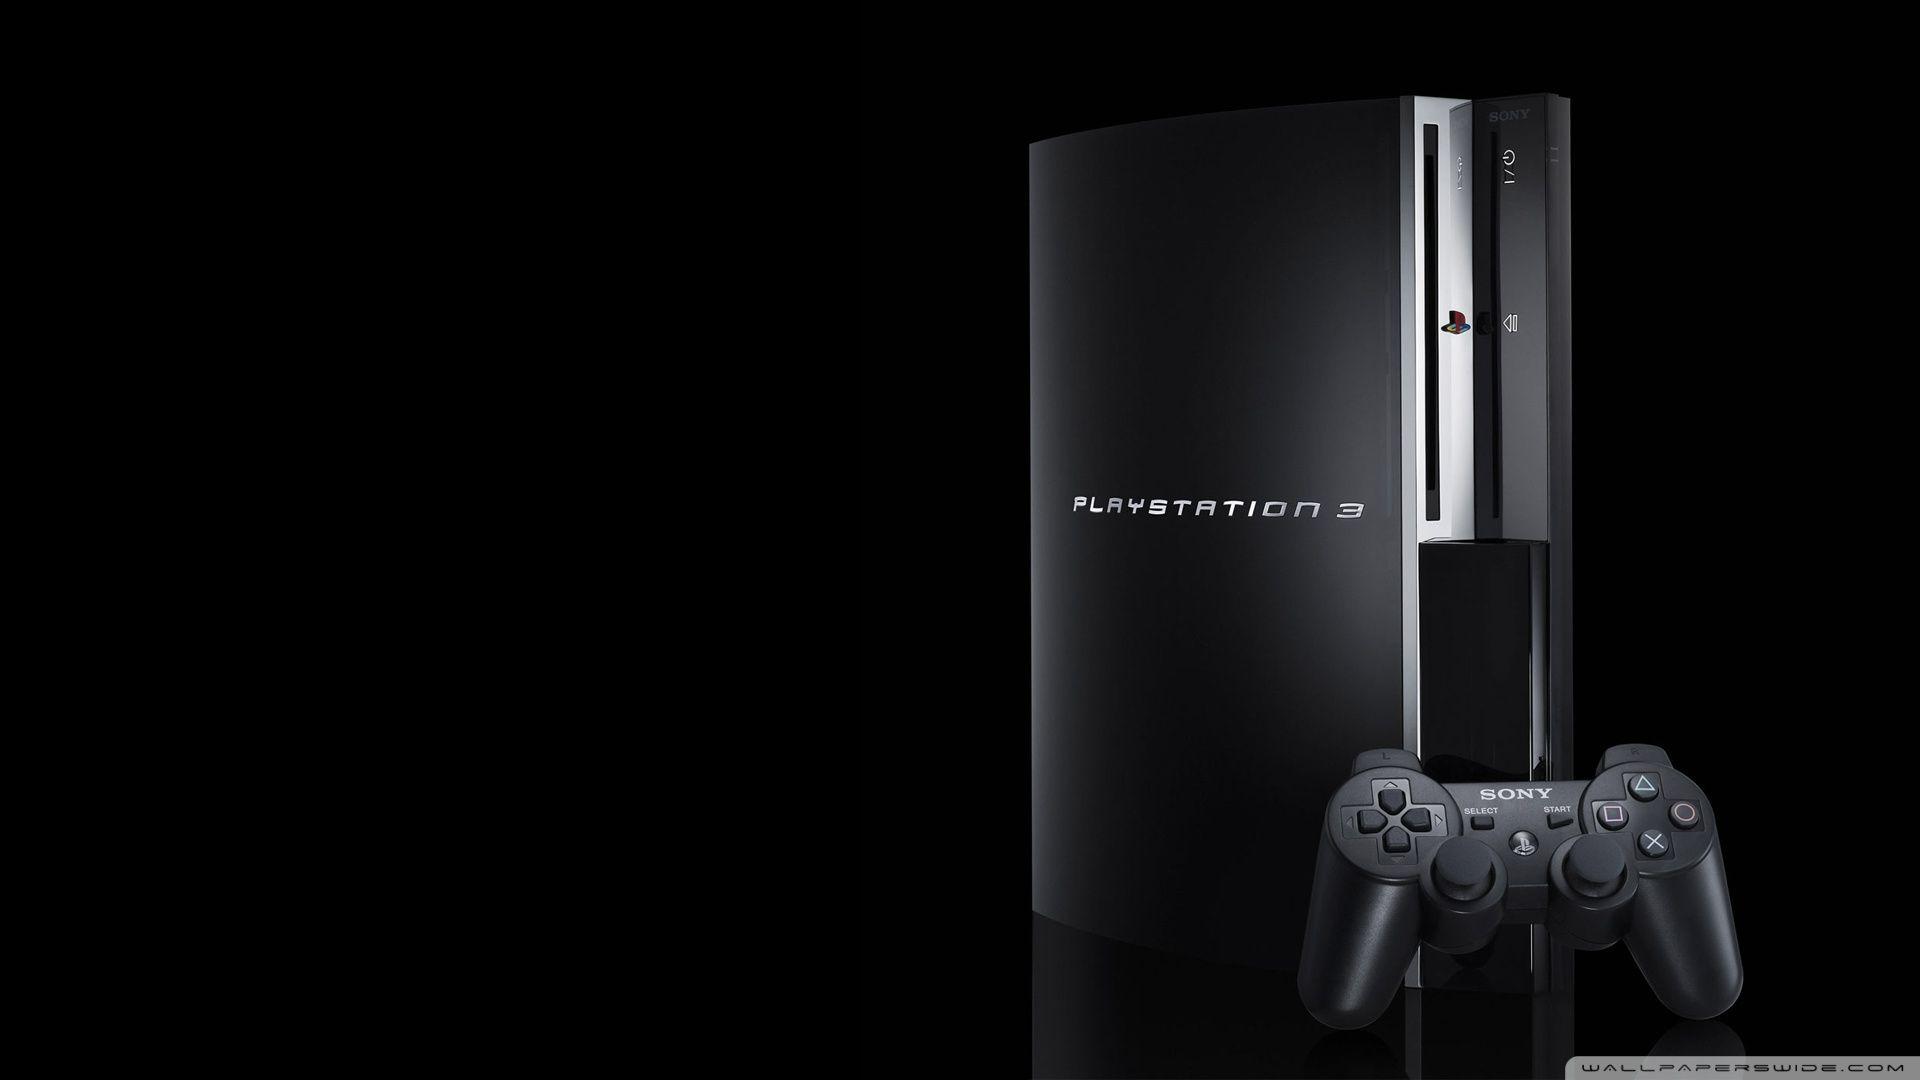 HD Sony Playstation 3 Wallpaper and Photo. HD Products Wallpaper